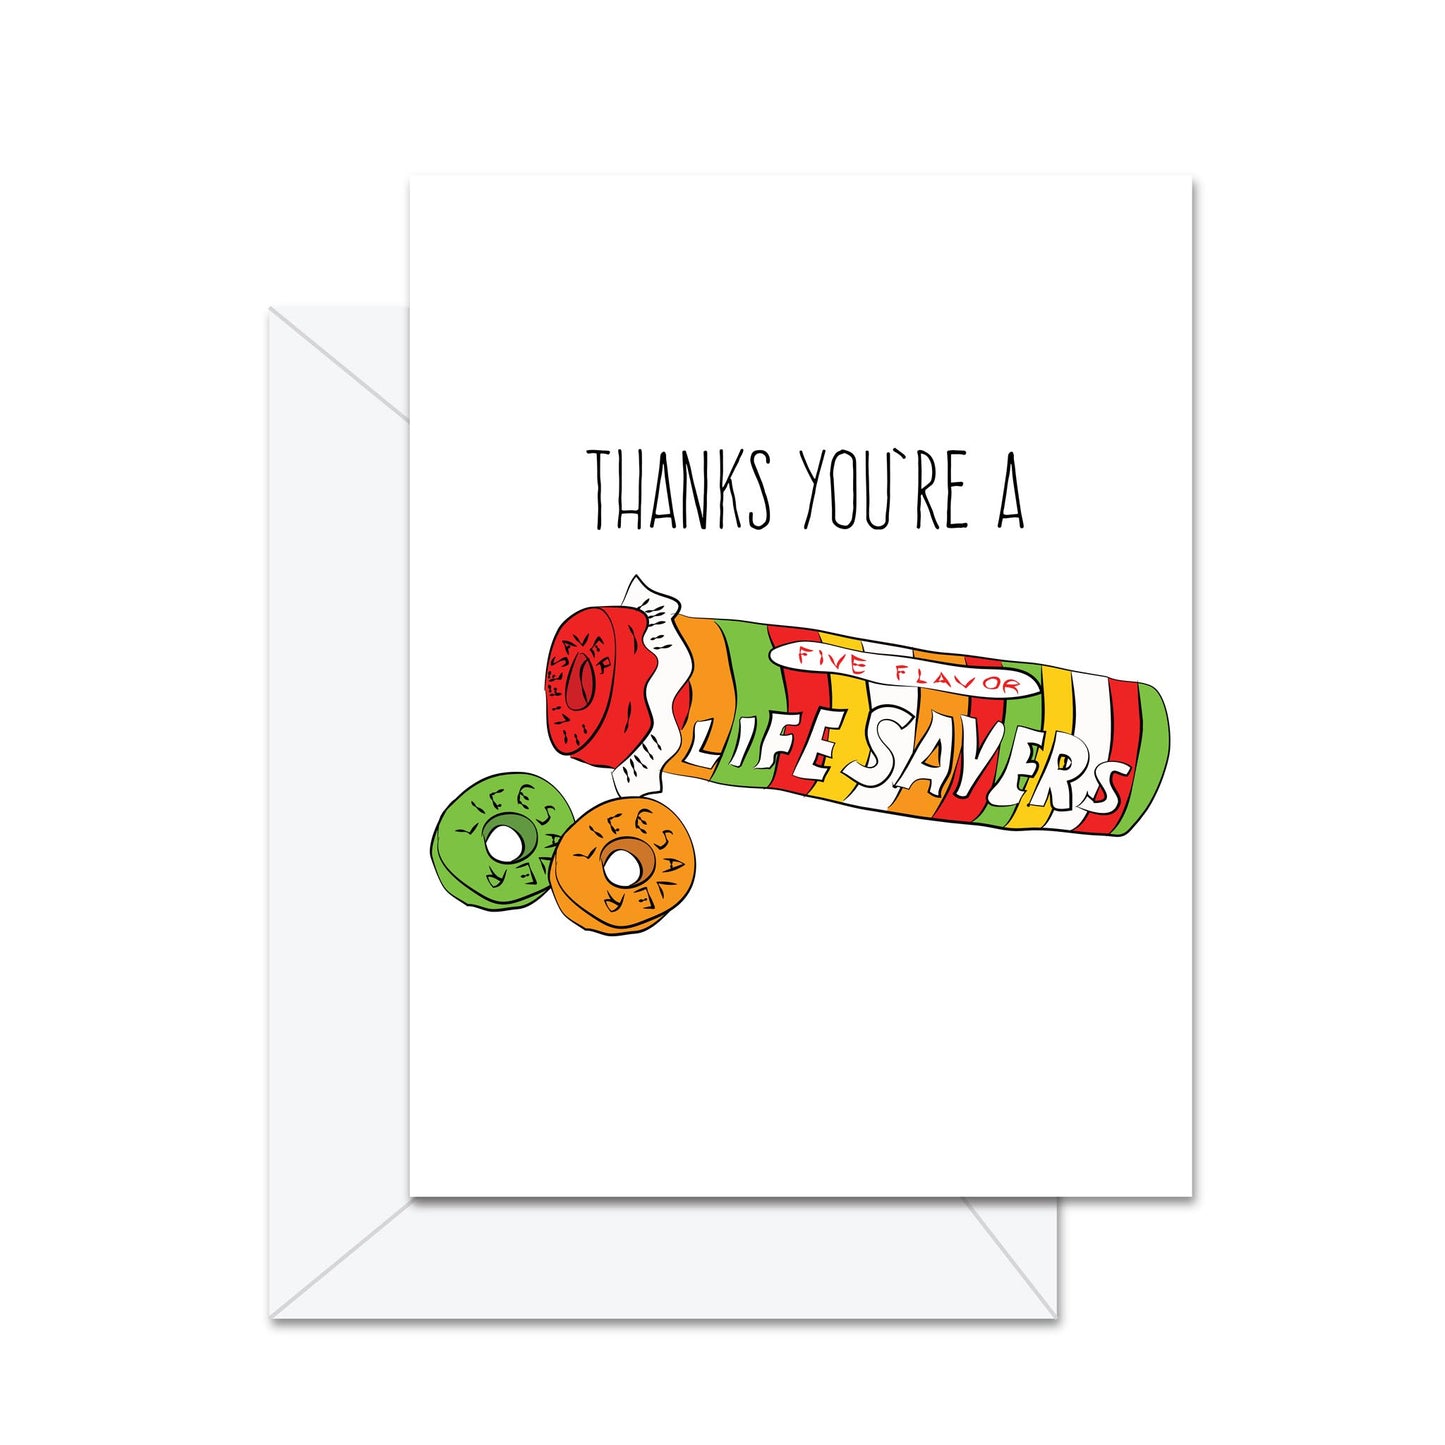 Thanks You're A Lifesaver - Greeting Card